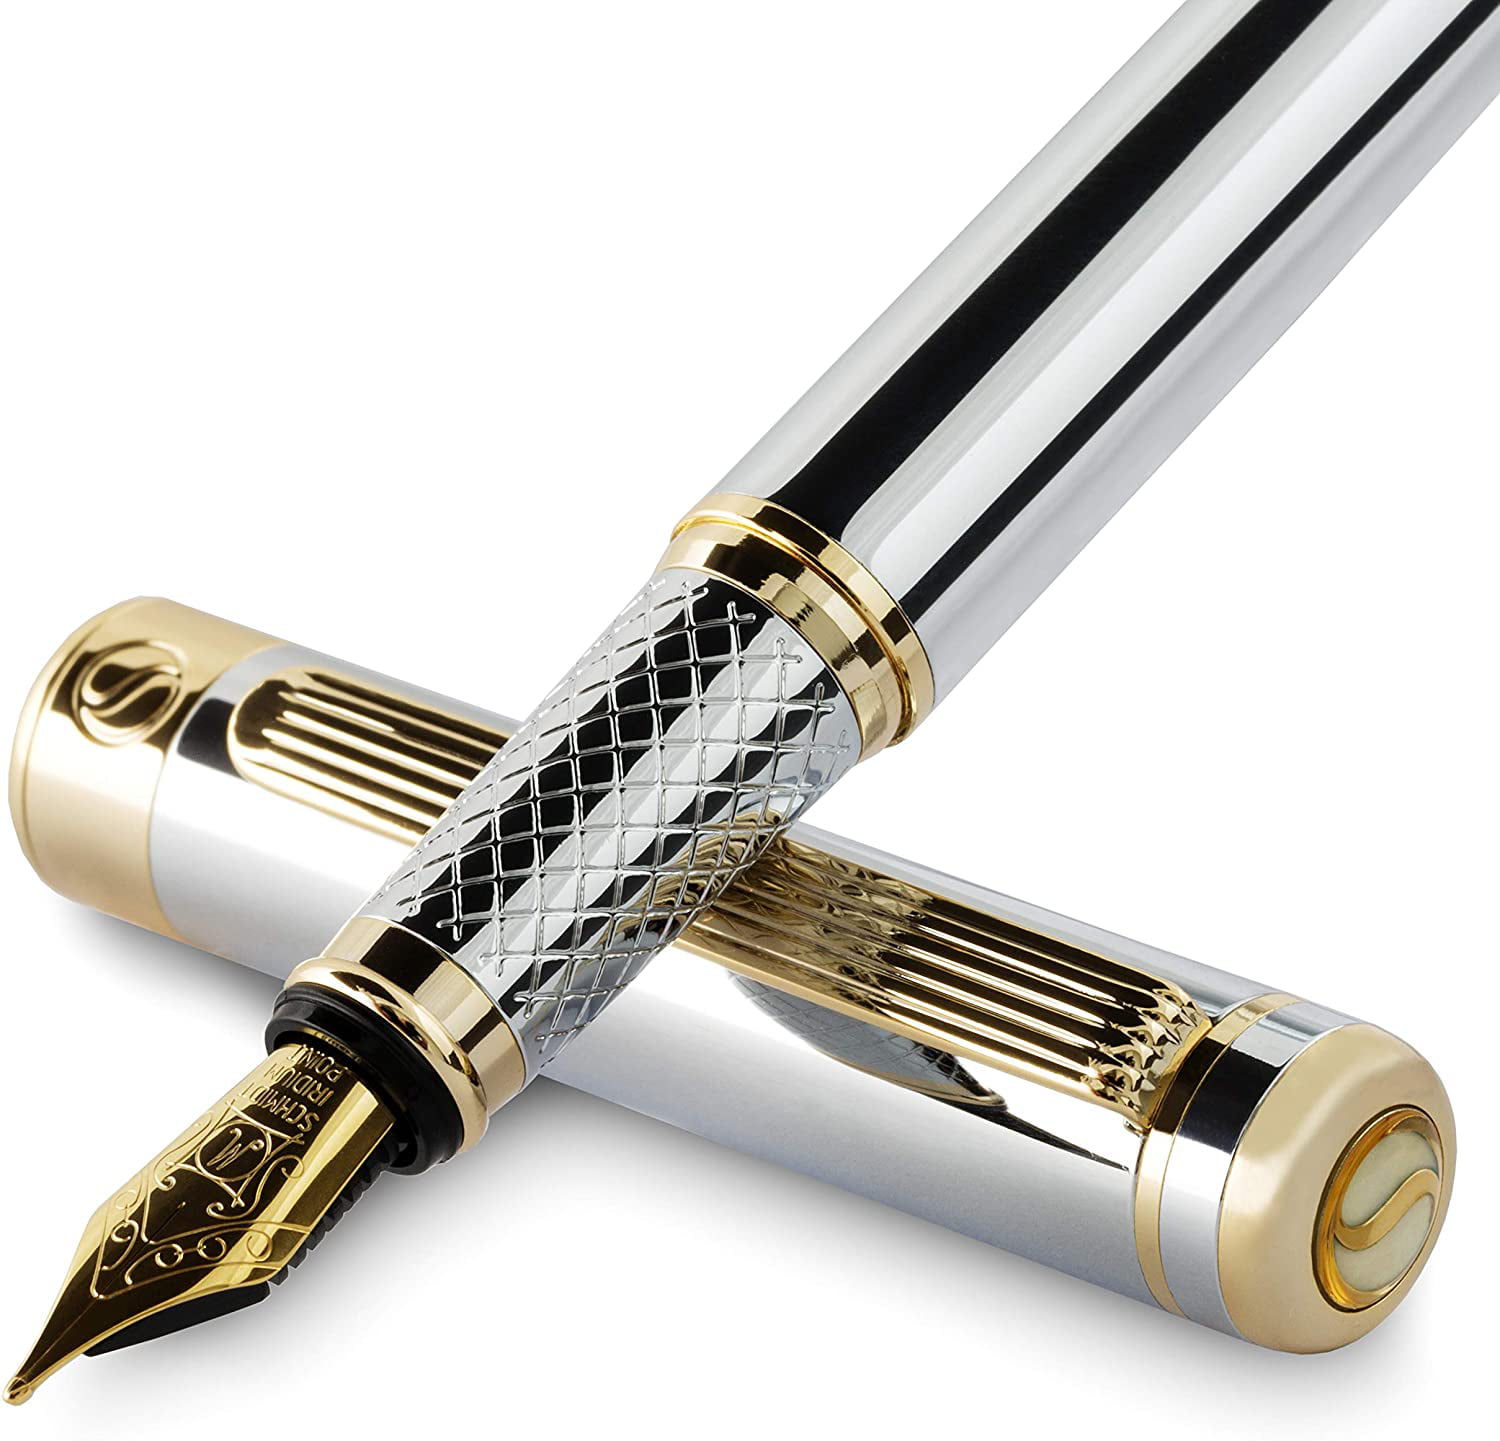 Hand Crafted  Fountain Pen in Brilliant Frost with Rhodium and Gold Metal Accents